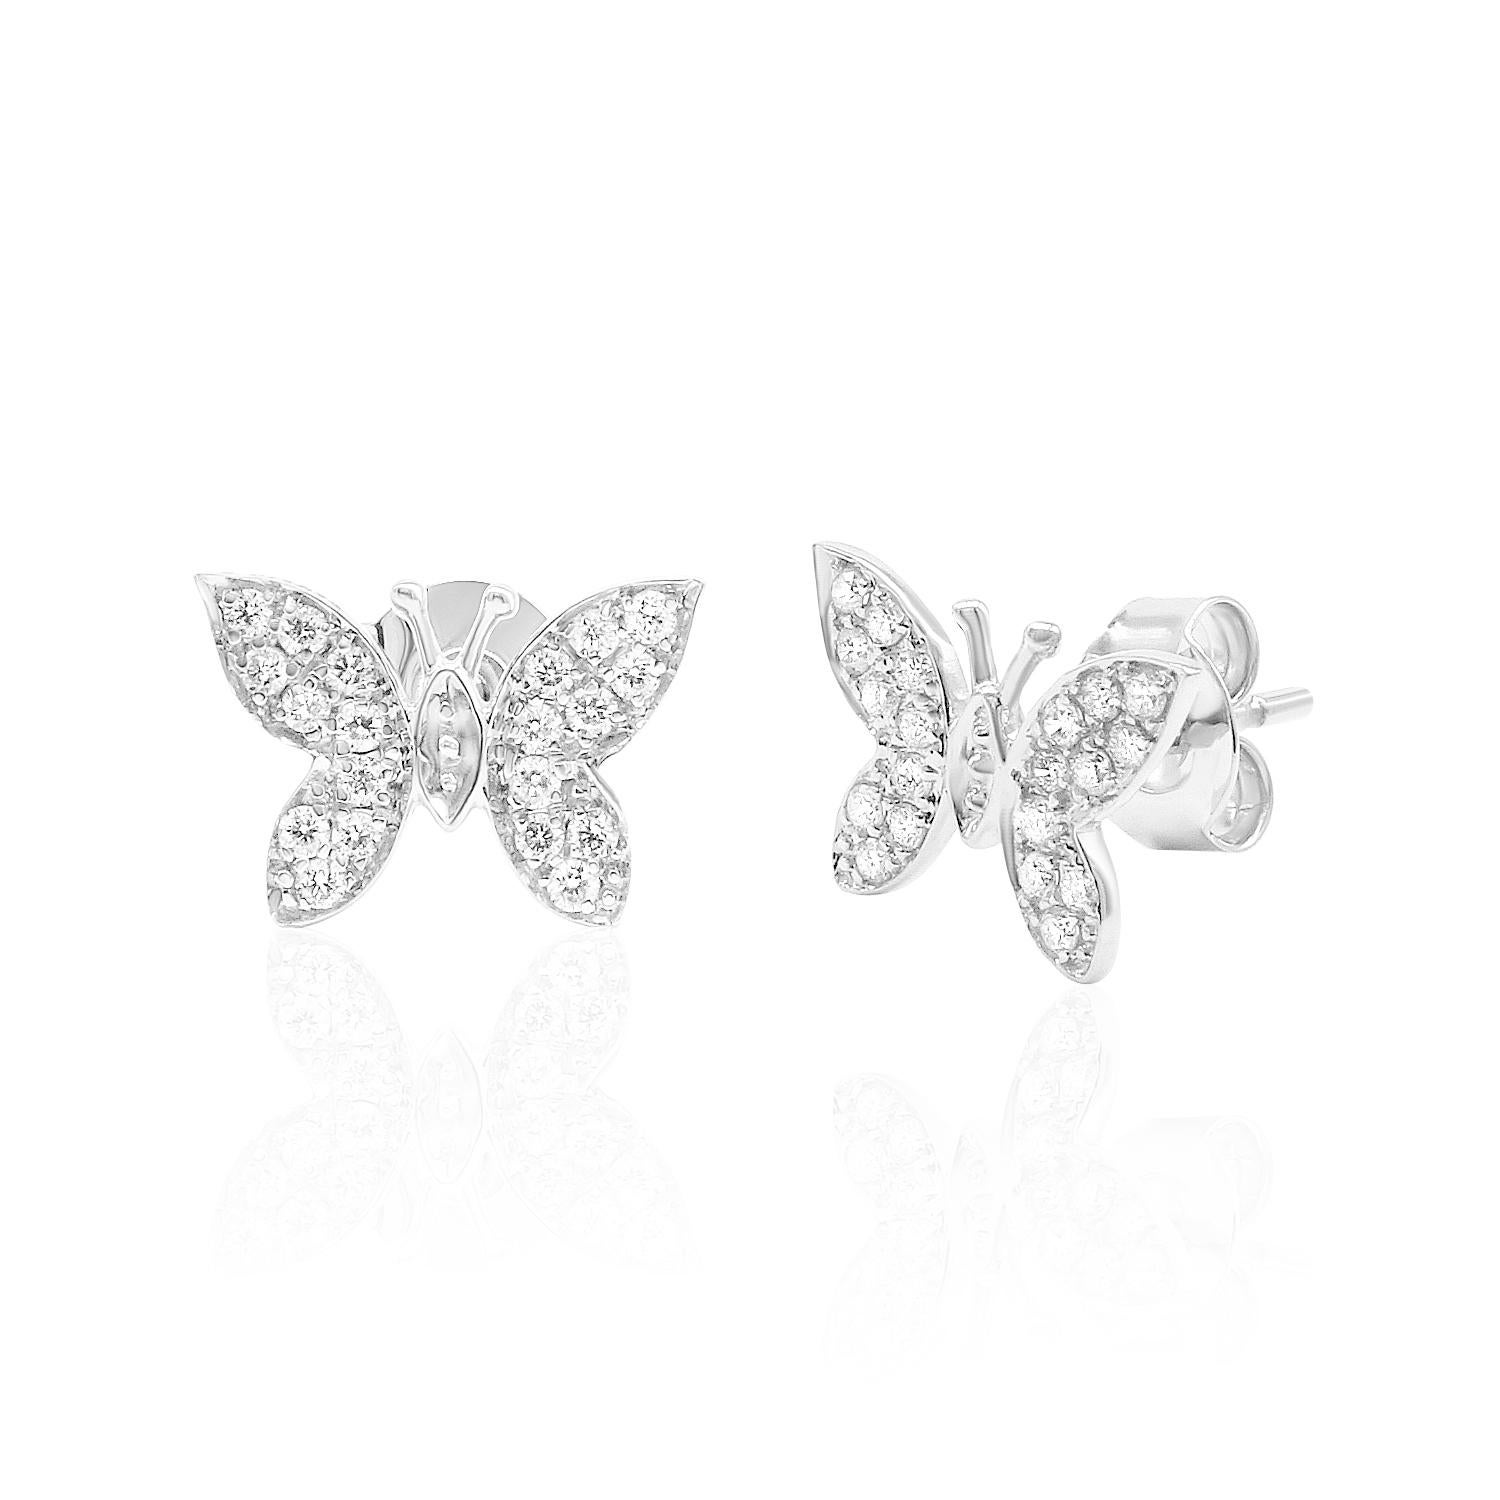 Elegant, Nature Inspired Dragonfly Diamond Stud Earring, featuring:
✧40 natural earth mined diamonds G-H color VS-SI weighing 0.25 carats 
✧ Measurements: 12mm length x 8.3mm width
✧ Available in 14K White, Yellow and Rose Gold
✧ Push back friction